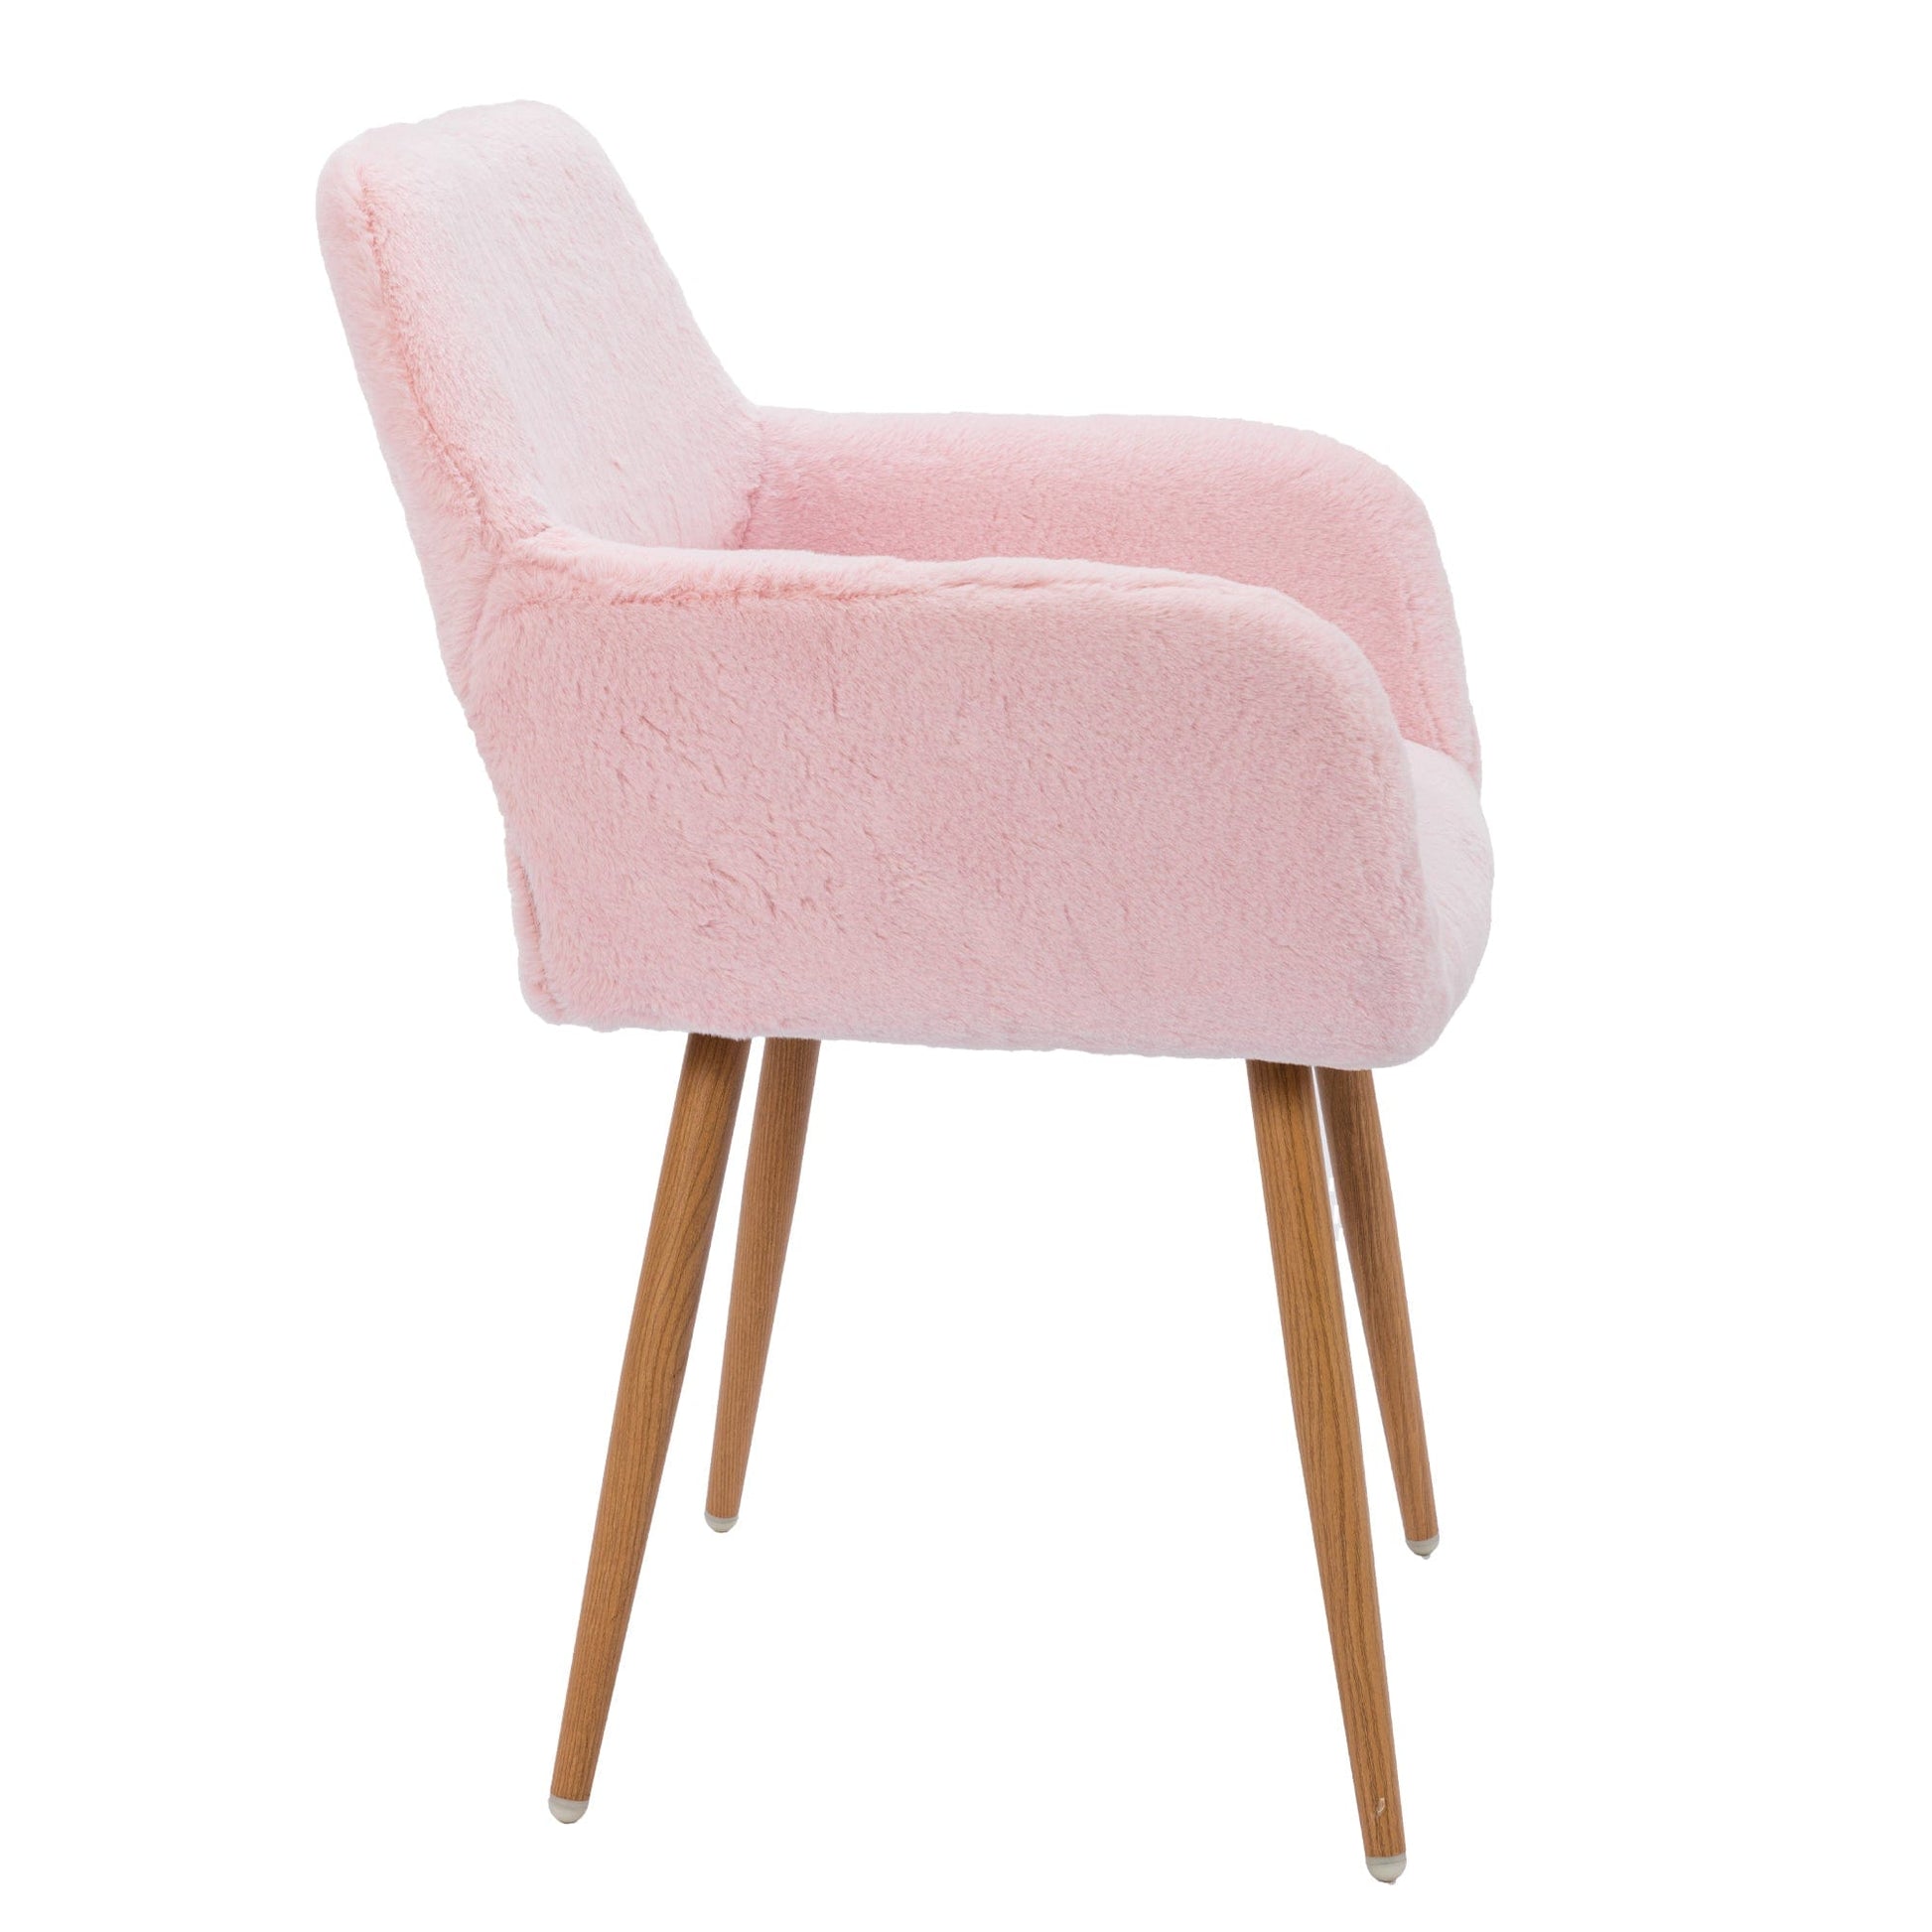 1st Choice Furniture Direct Dining Chairs 1st Choice Modern Mid-Century Side Chairs with Faux Fur in Pink Finish